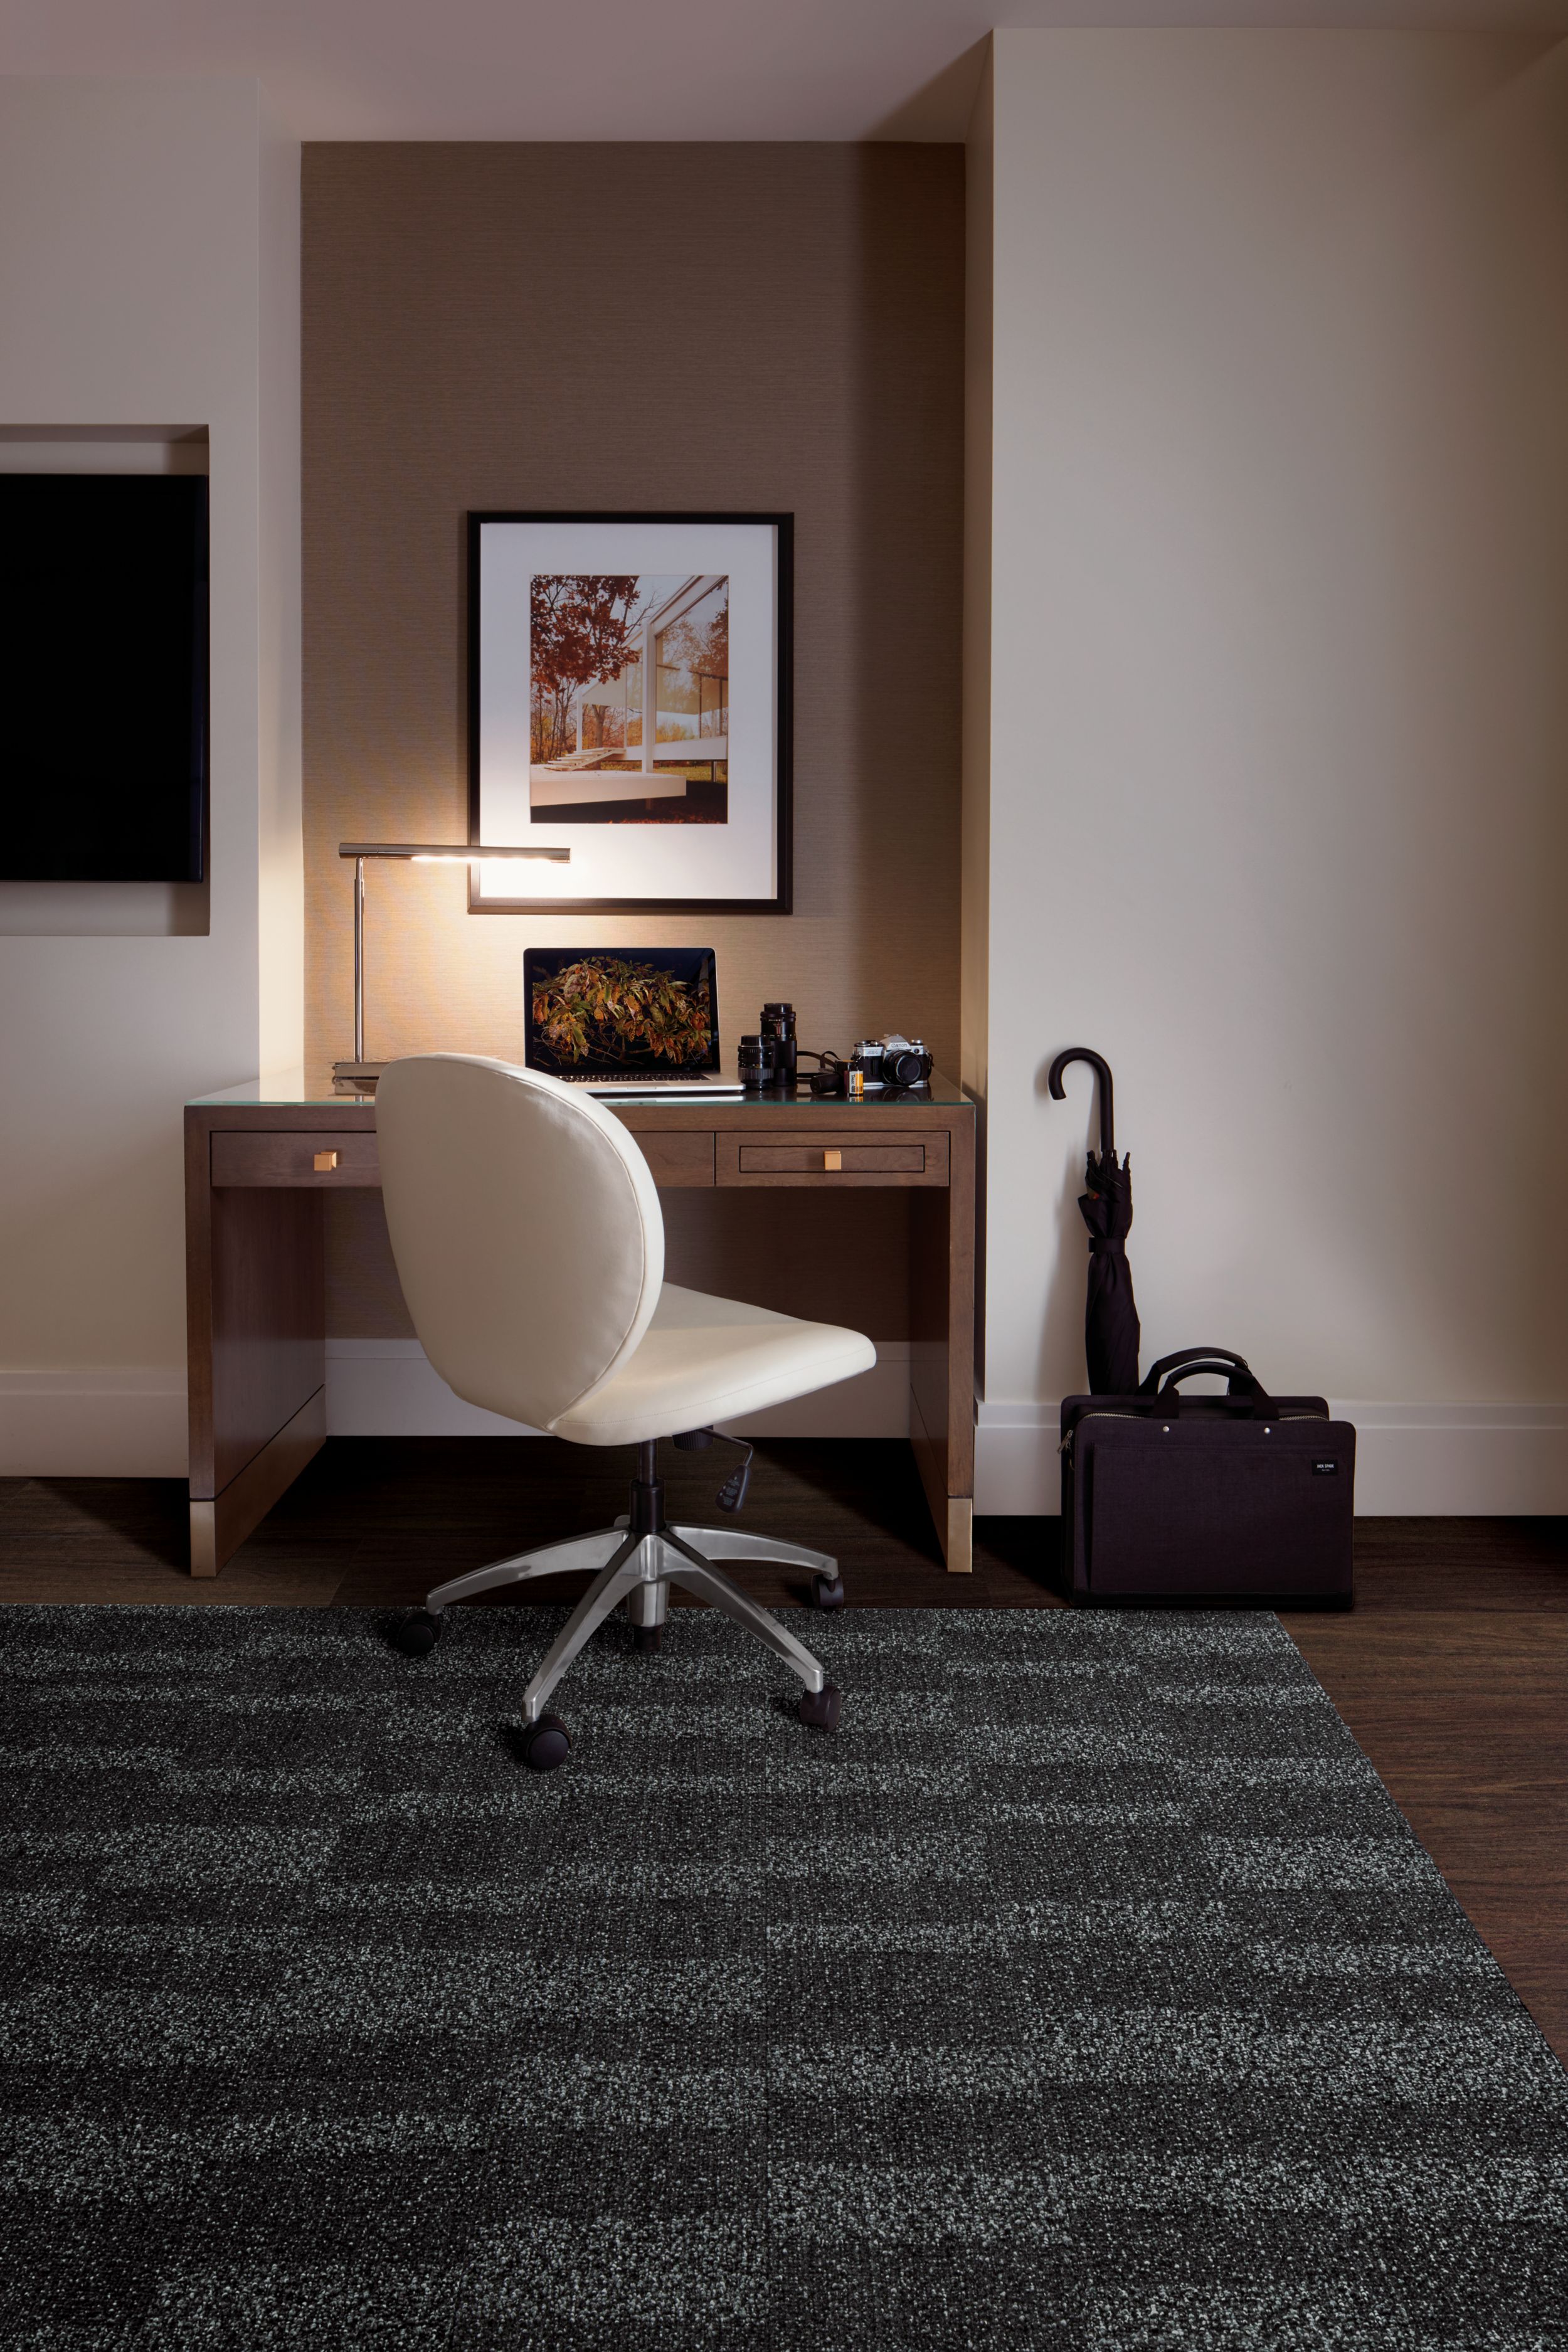 Interface RMS 706 plank carpet tile and Natural Woodgrains LVT in hotel guest room imagen número 1